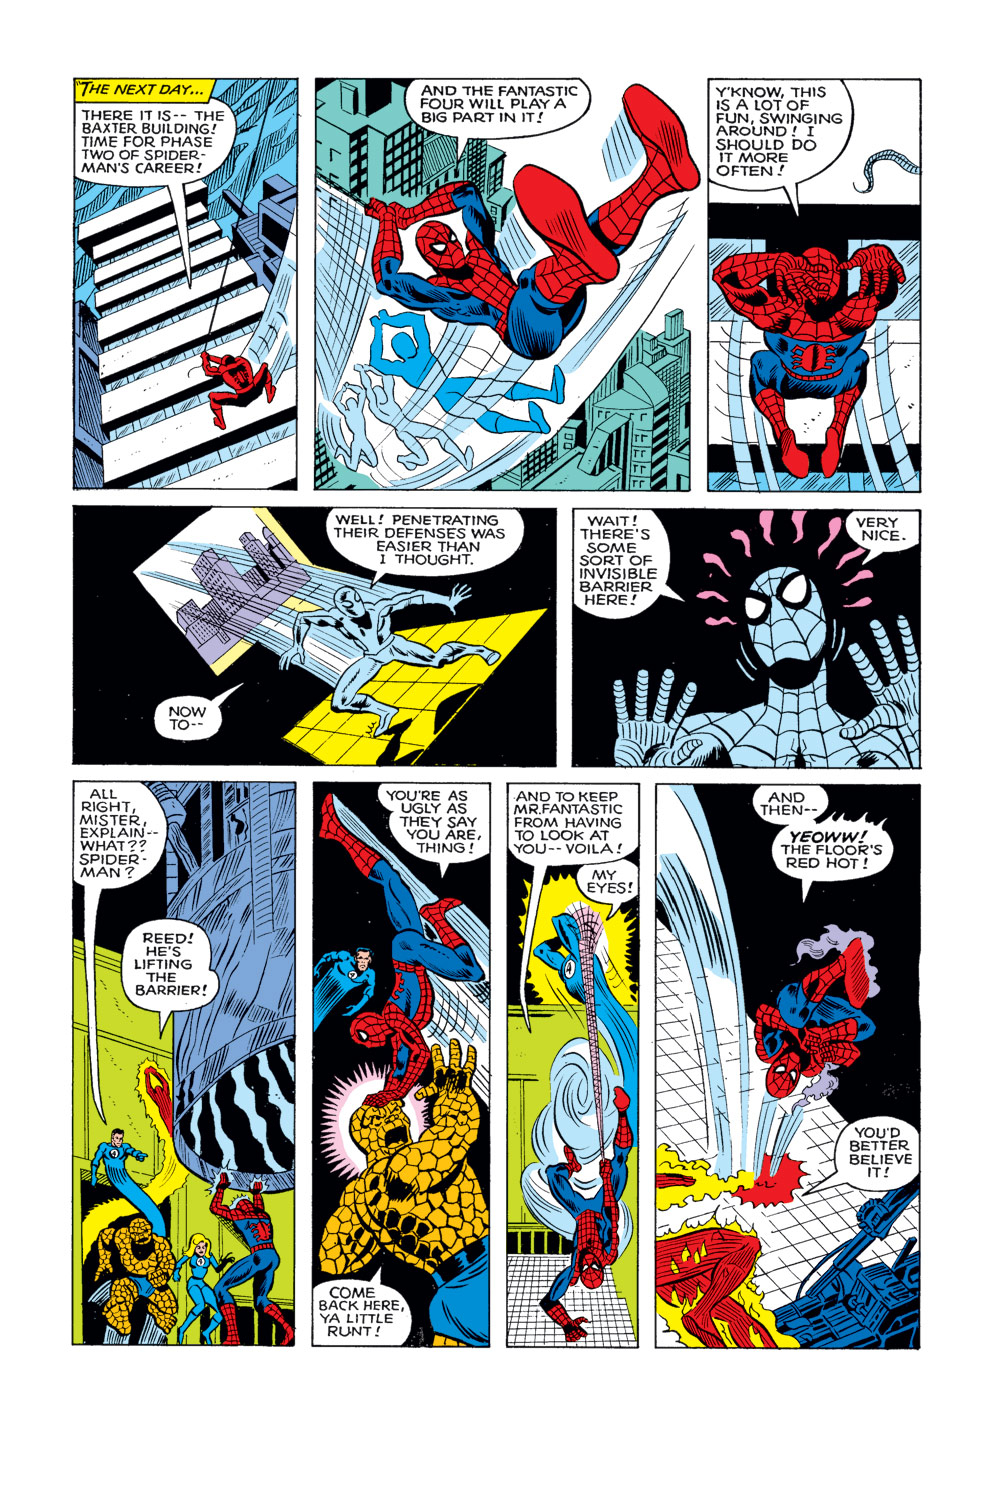 What If? (1977) issue 19 - Spider-Man had never become a crimefighter - Page 14